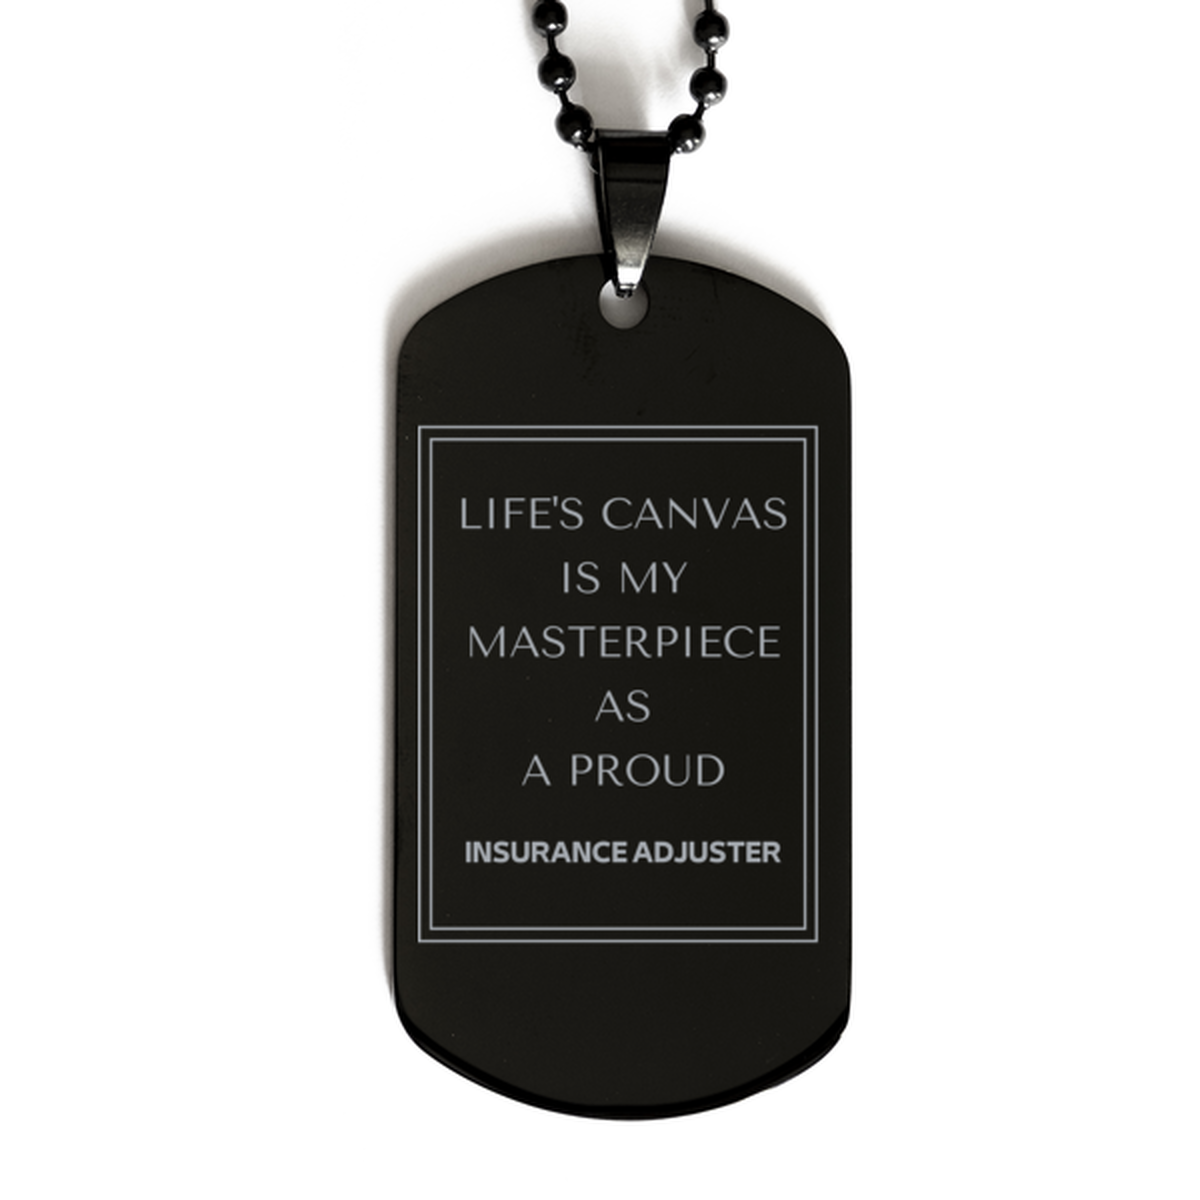 Proud Insurance Adjuster Gifts, Life's canvas is my masterpiece, Epic Birthday Christmas Unique Black Dog Tag For Insurance Adjuster, Coworkers, Men, Women, Friends